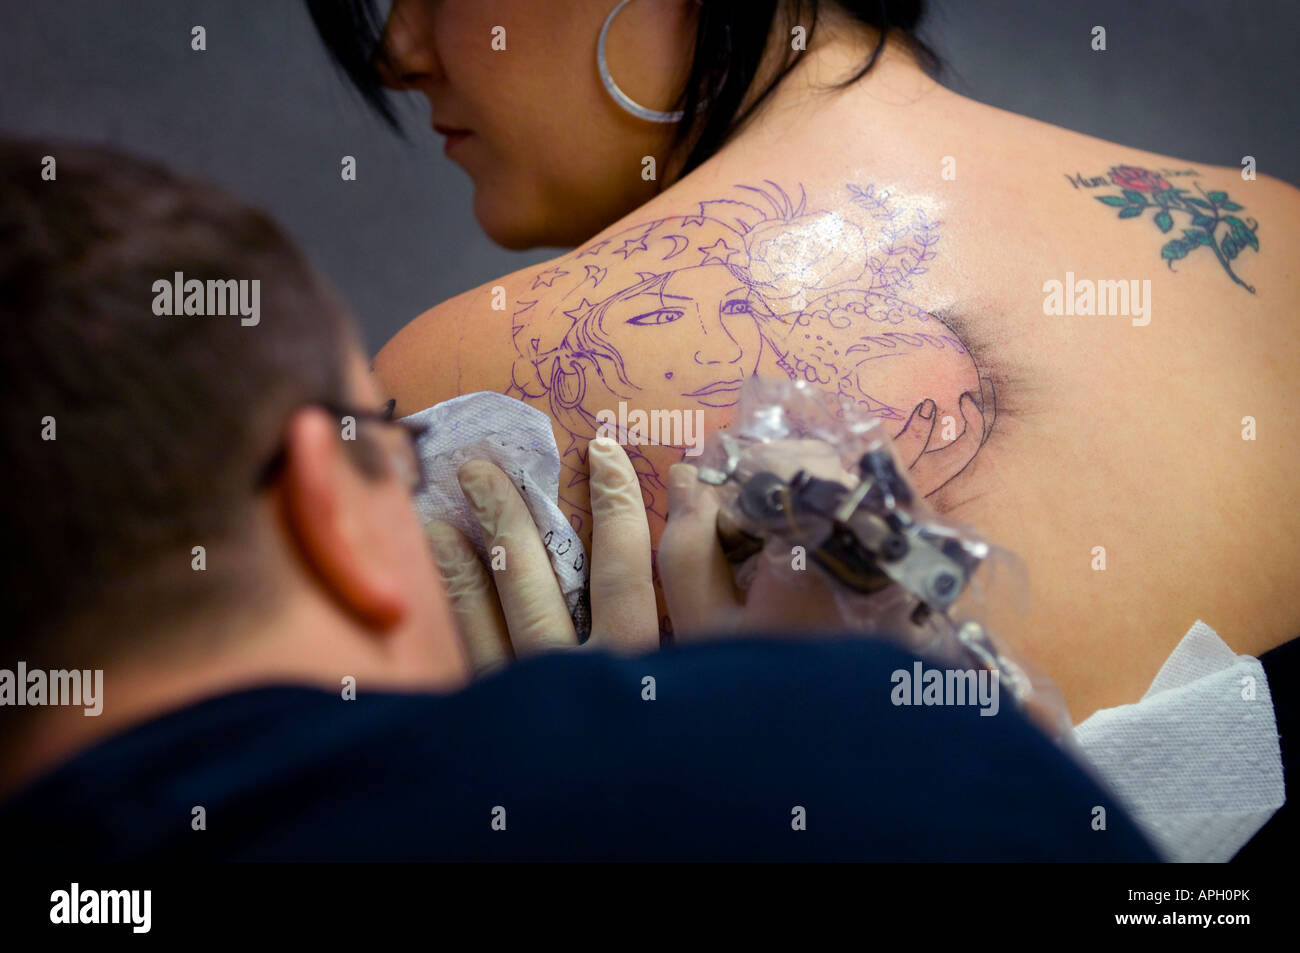 A tattoo artist at work inking a design onto a woman's shoulder. Picture by Jim Holden. Stock Photo